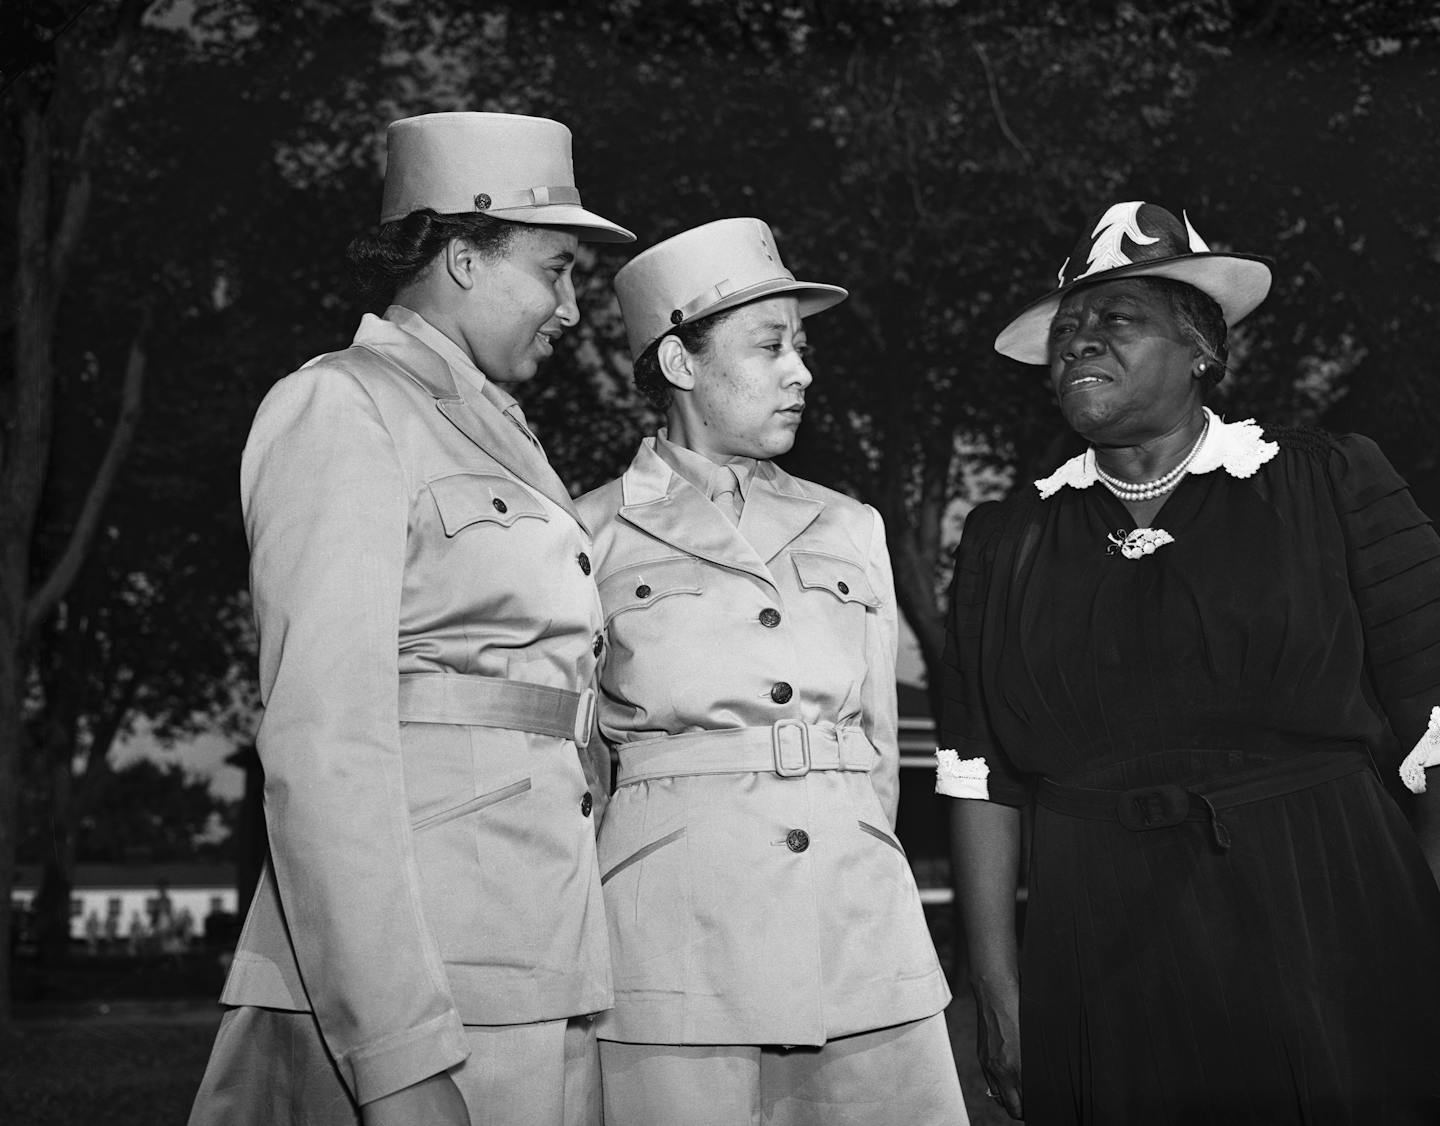 Two women in military uniforms speak to a woman in civilian clothes.